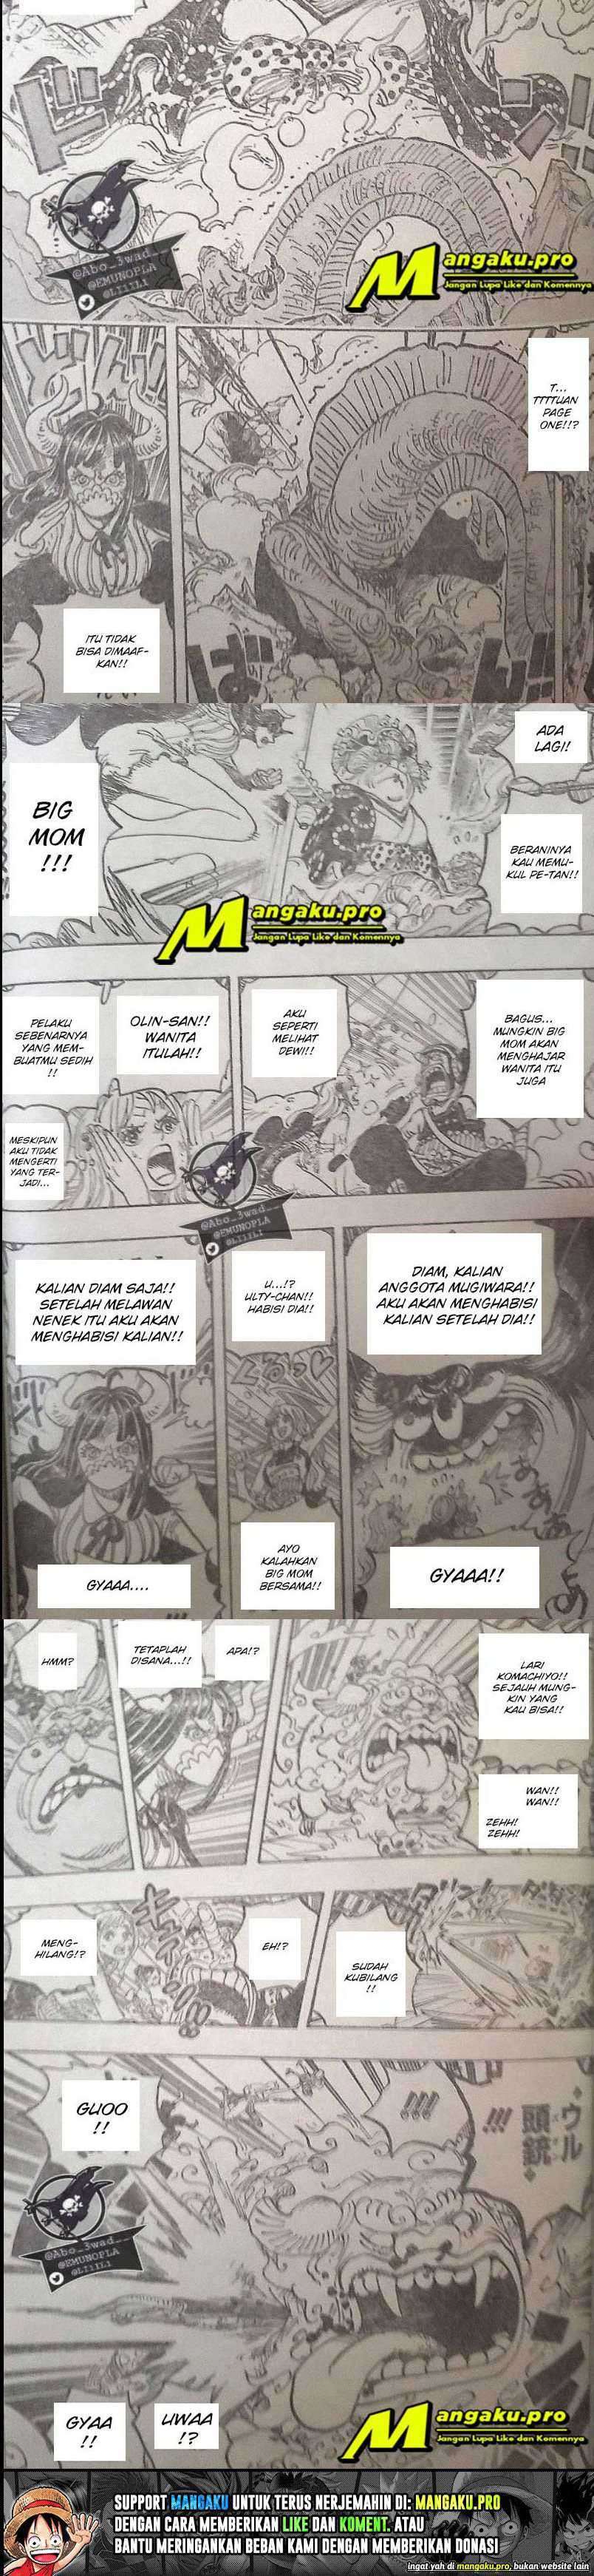 One Piece Chapter 1012 lq Image 4